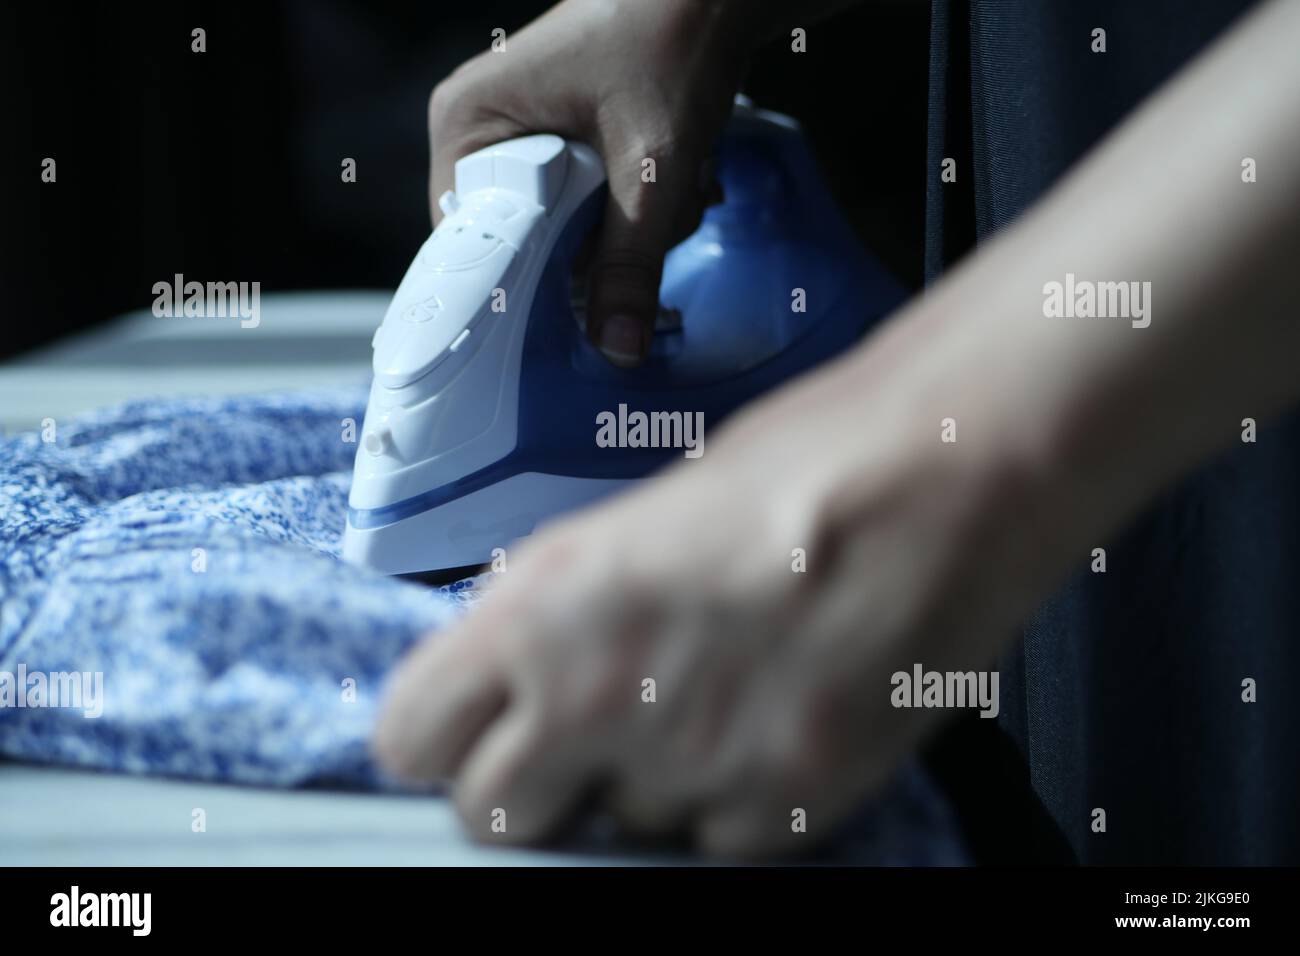 Laundry Services. Woman Hand Ironing Cloth On Ironing Board Stock Photo -  Alamy